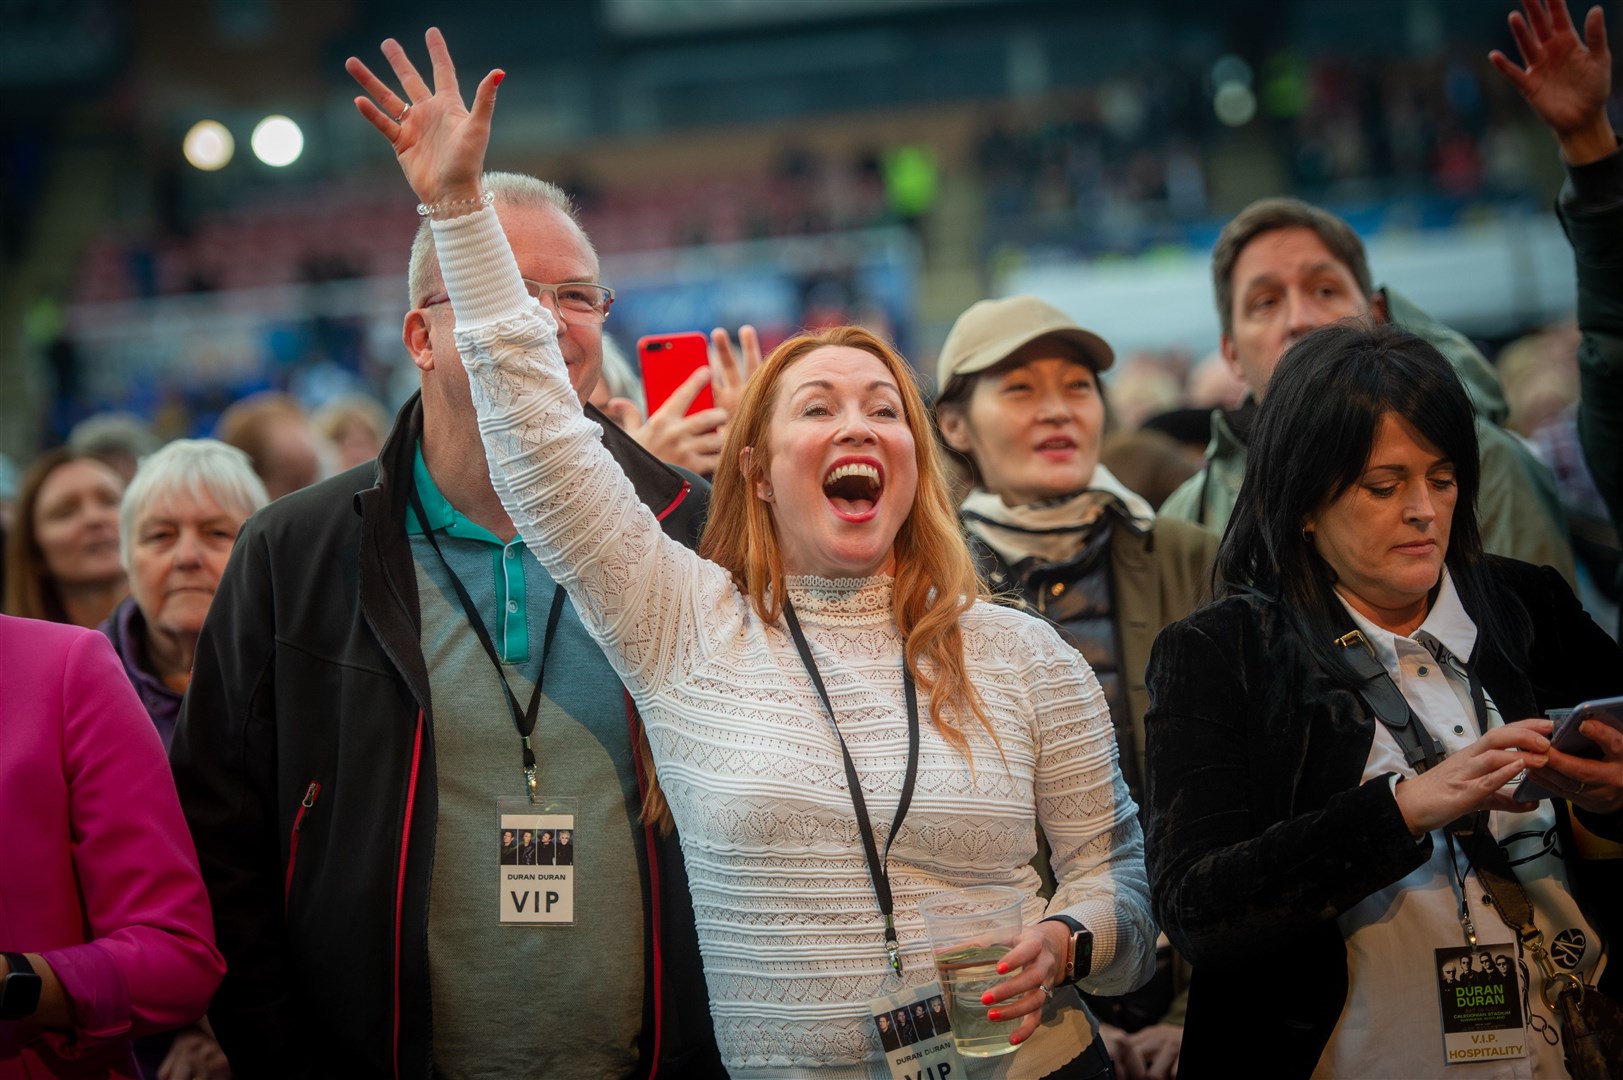 A Duran Duran fan delighted as the band arrive onstage. Picture: Callum Mackay